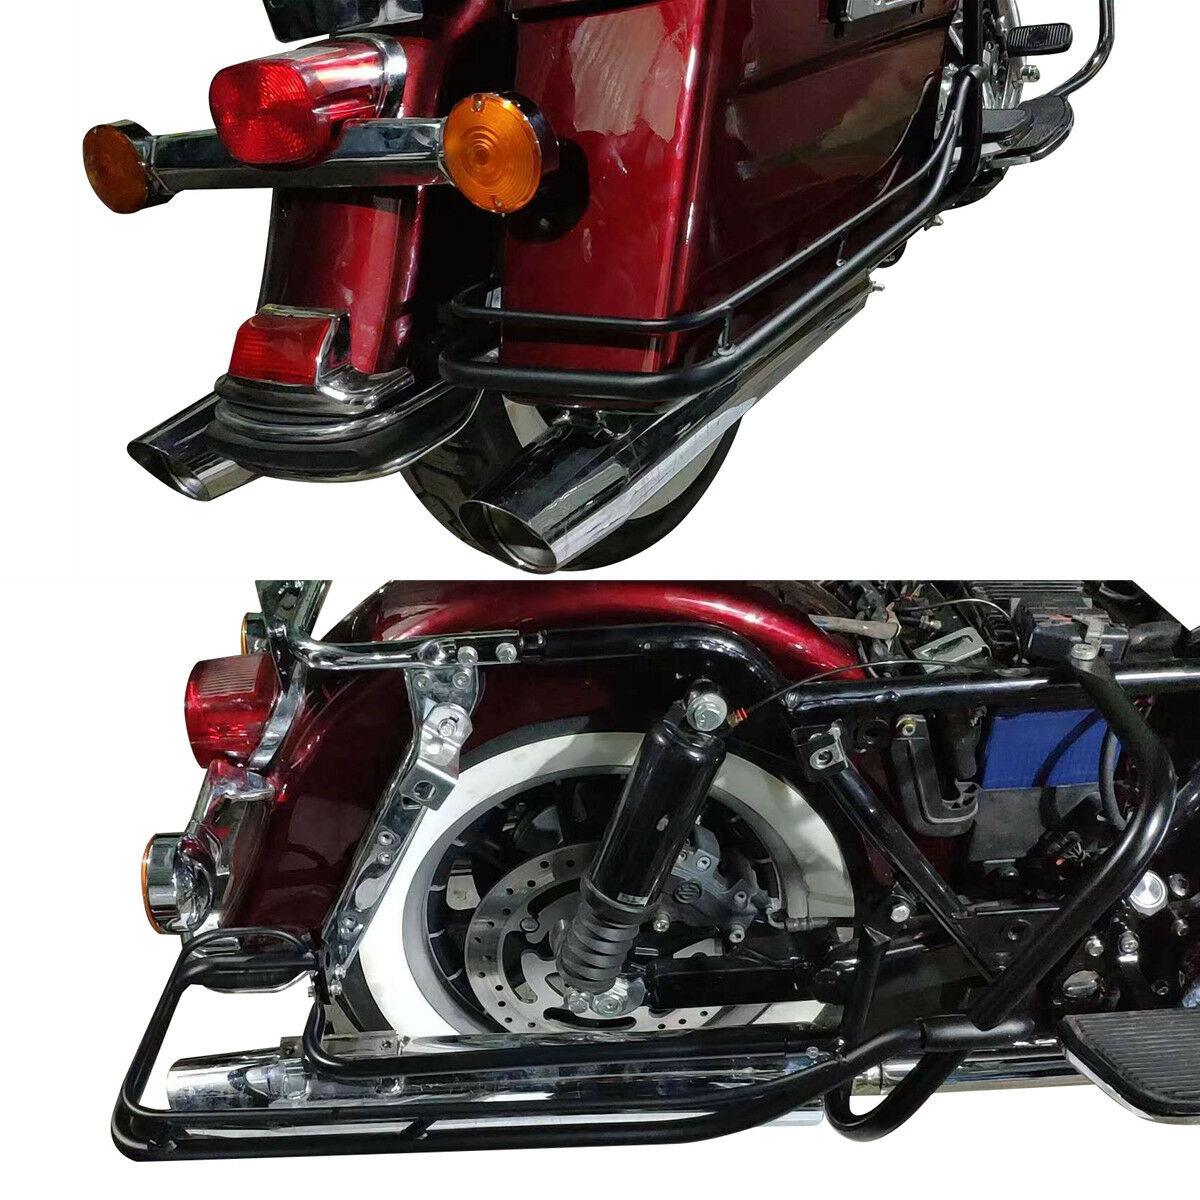 Black Hard Saddlebag Guards Support Fit For Harley Touring Road King 2009-2013 - Moto Life Products